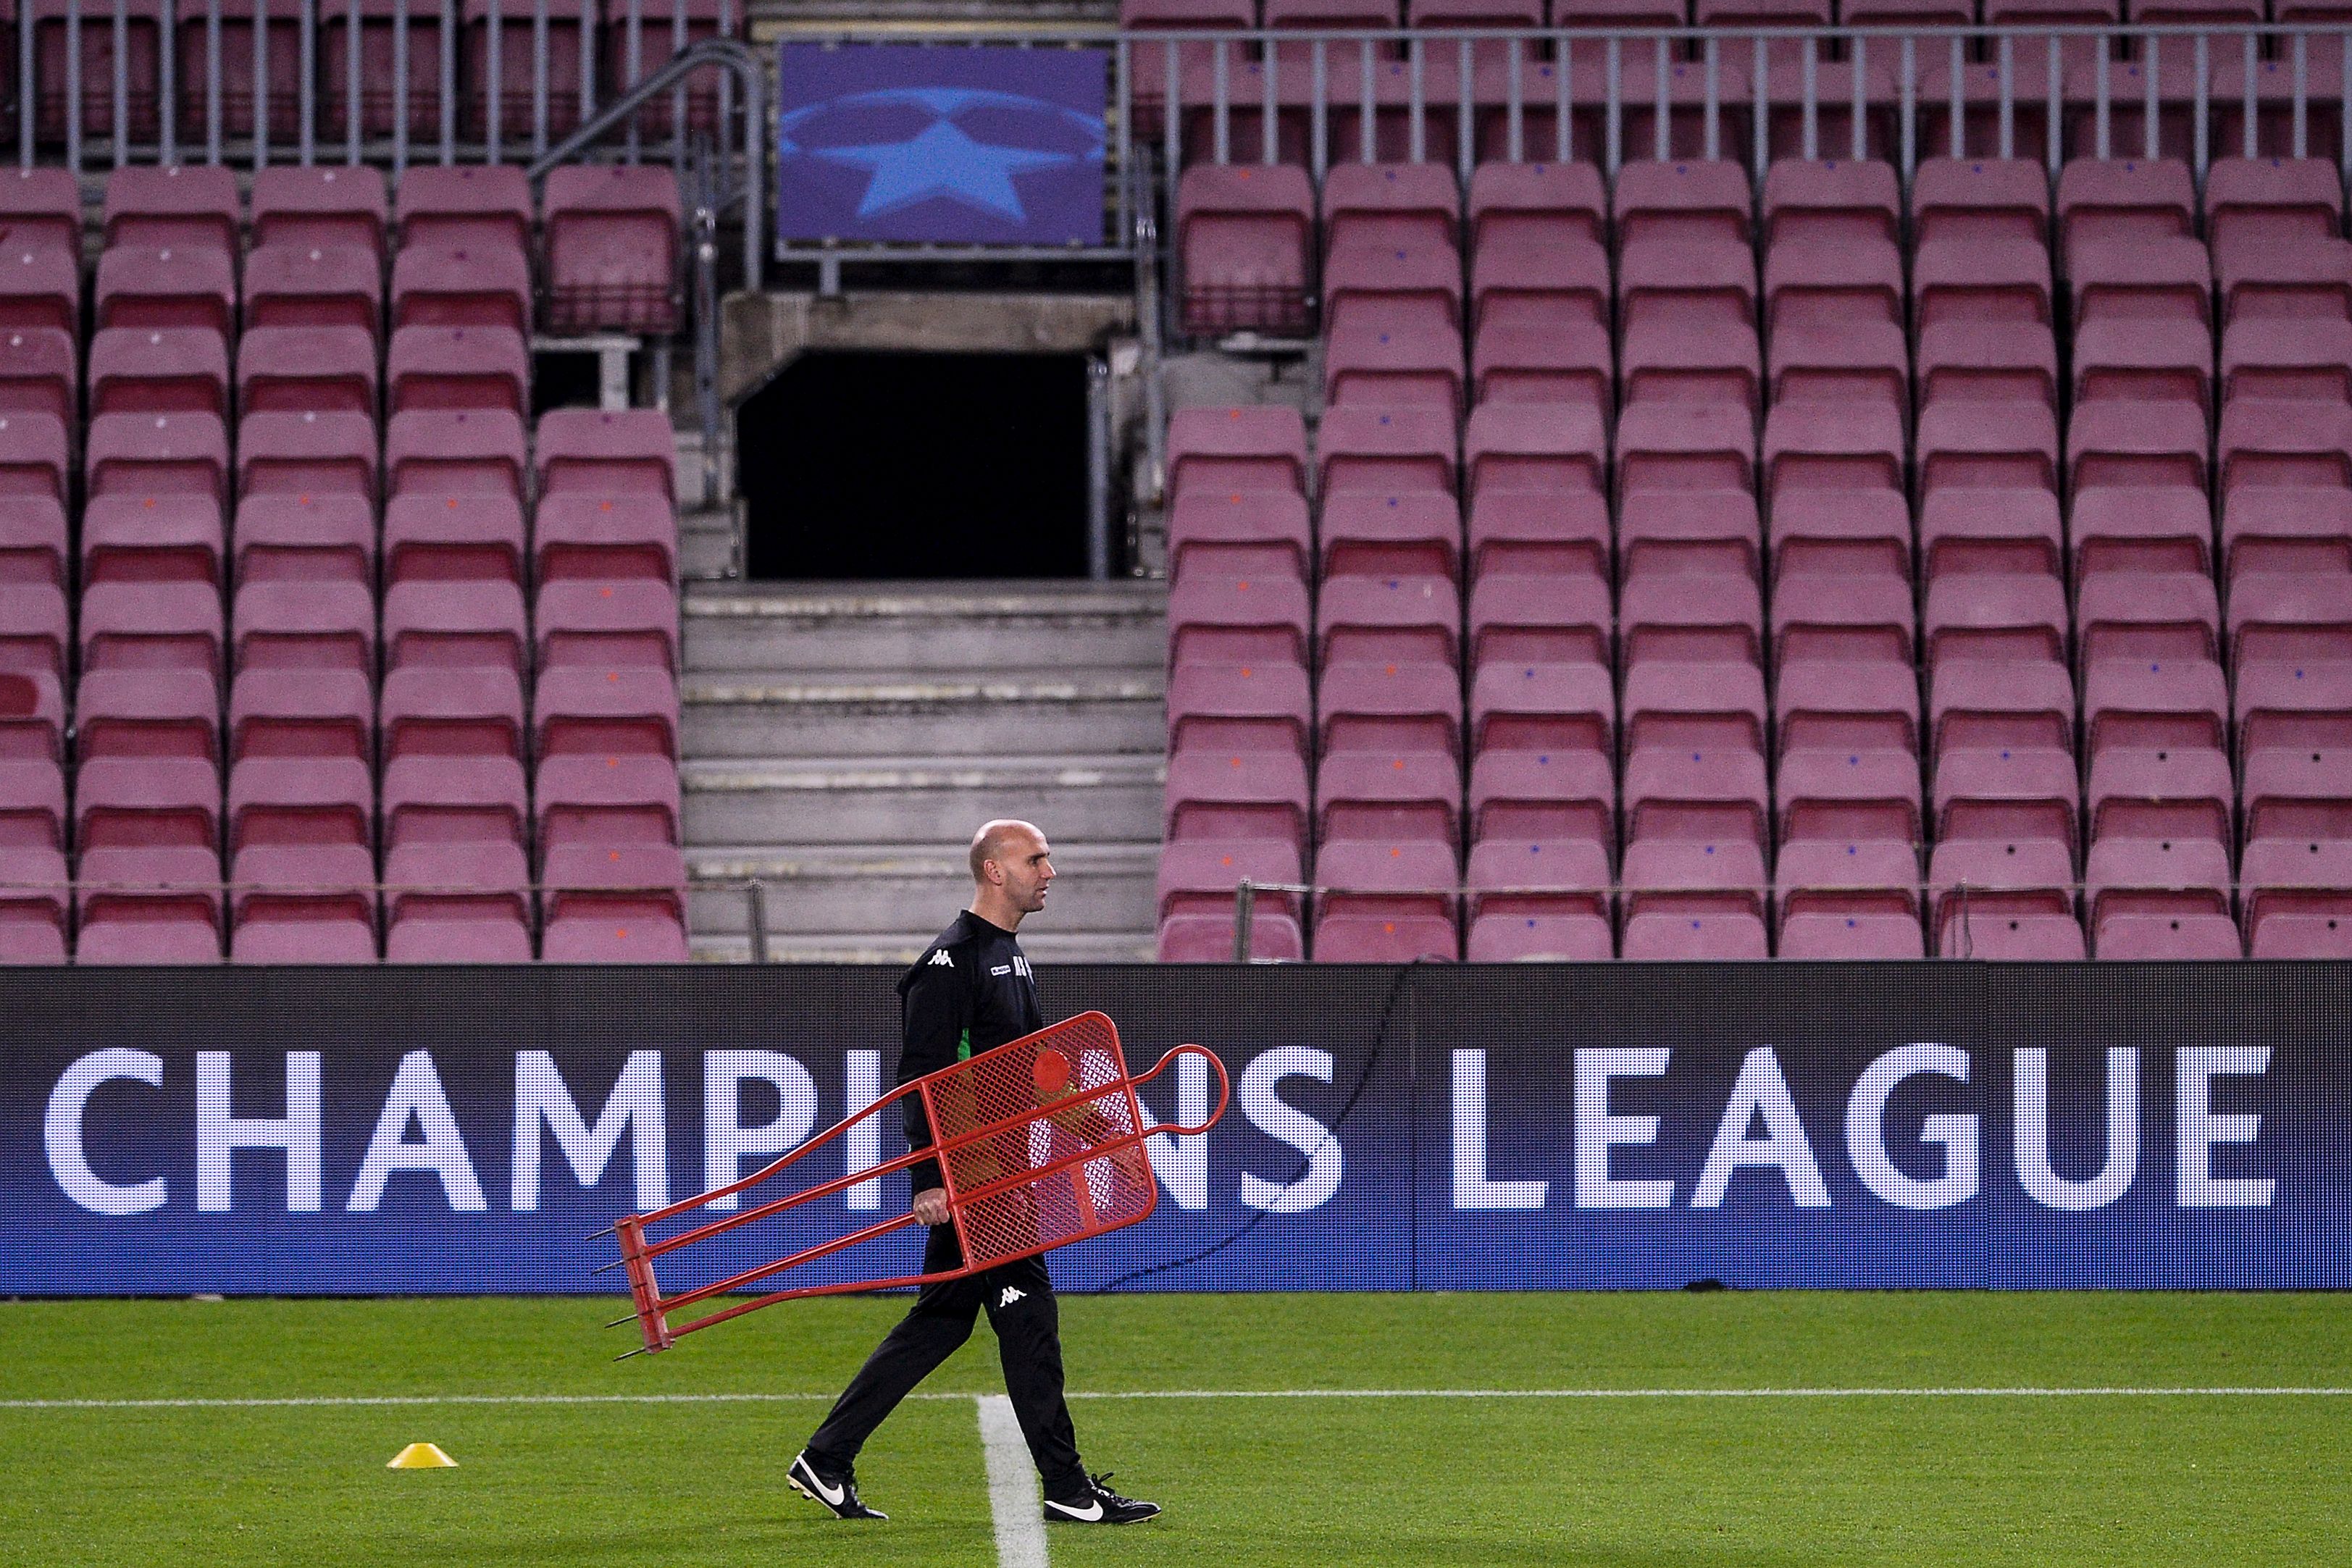 Moenchengladbach's coach Andre Schubert takes part in a training session at the Camp Nou stadium in Barcelona on December 5, 2016, on the eve of the UEFA Champions League football match FC Barcelona vs Borussia Monchengladbach.   / AFP / JOSEP LAGO        (Photo credit should read JOSEP LAGO/AFP/Getty Images)